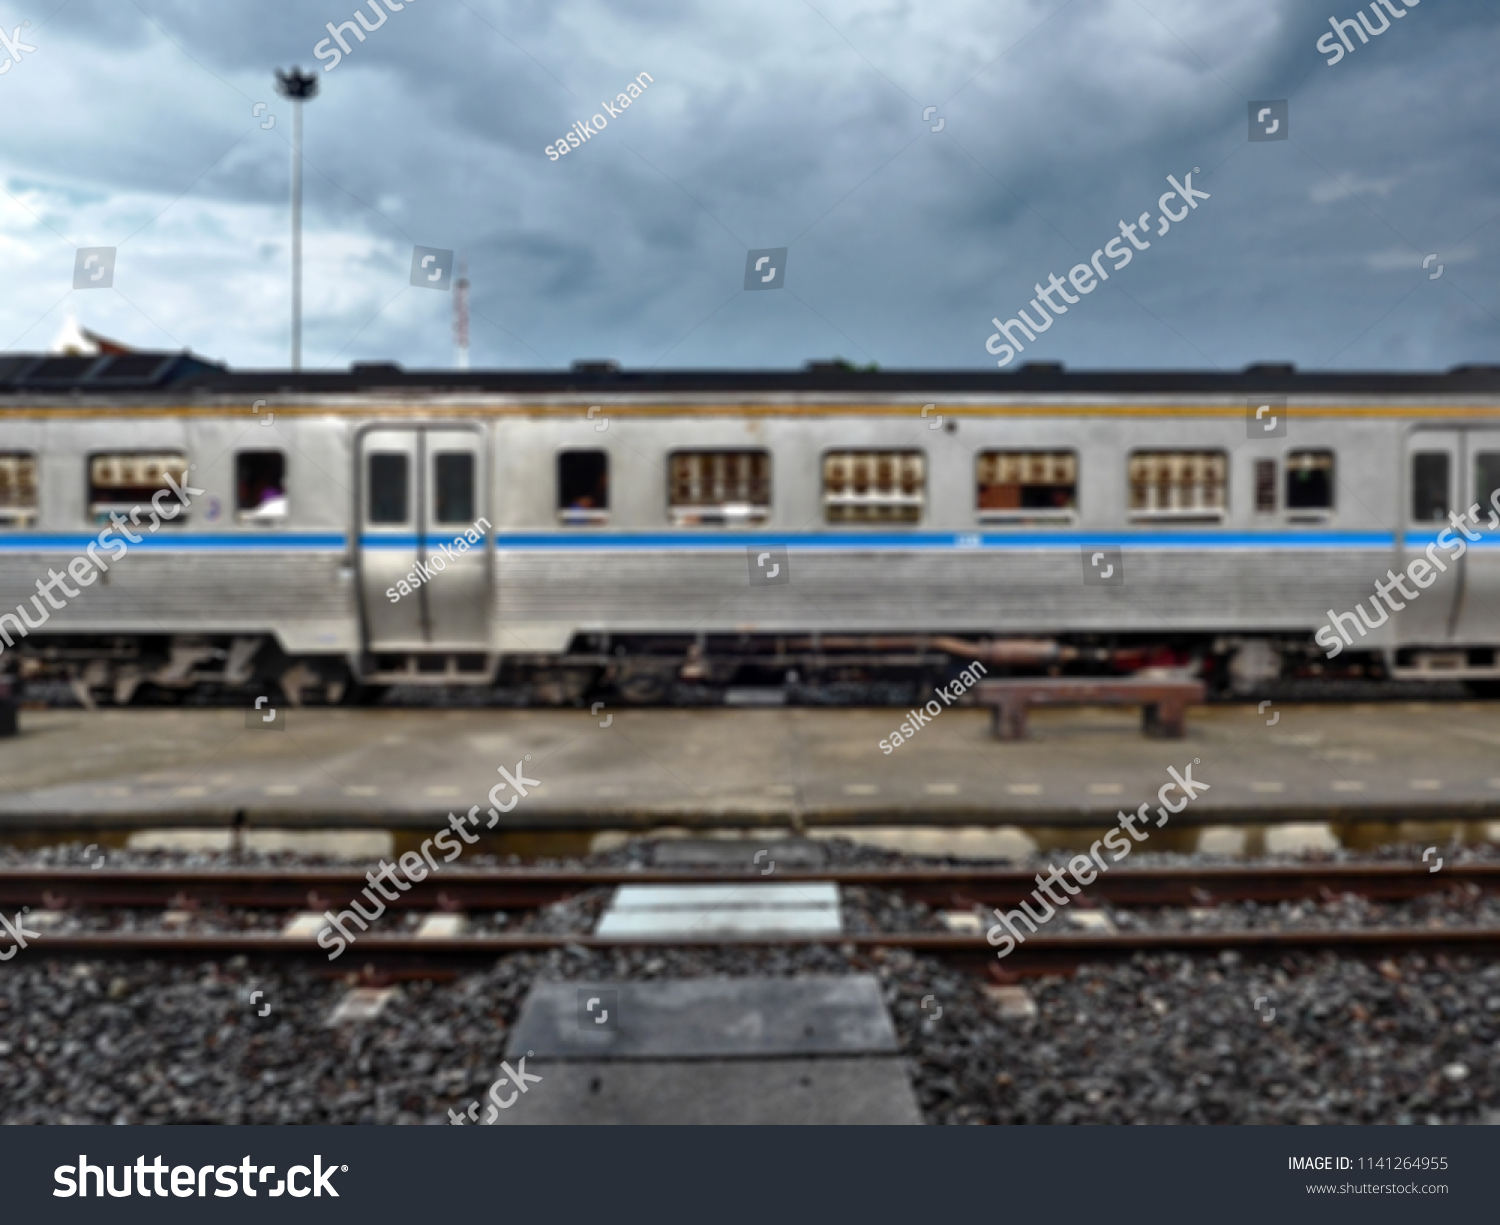 Blurry image and out of focus with dry brush filter : The old blue and silver wagon with windows of train parked at a station platform in  Thailand  #1141264955